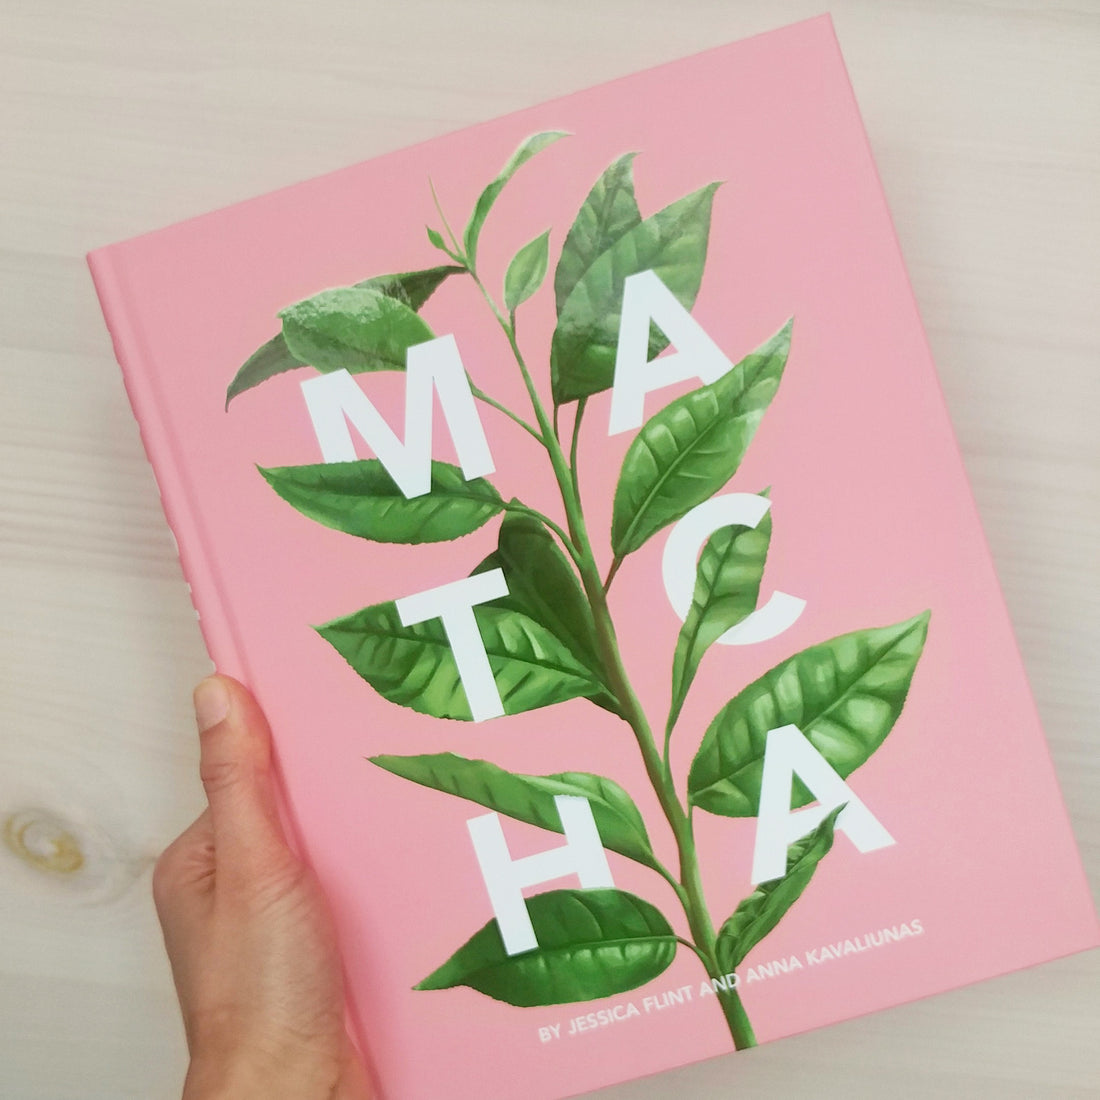 Chalait is featured in a new book about matcha!